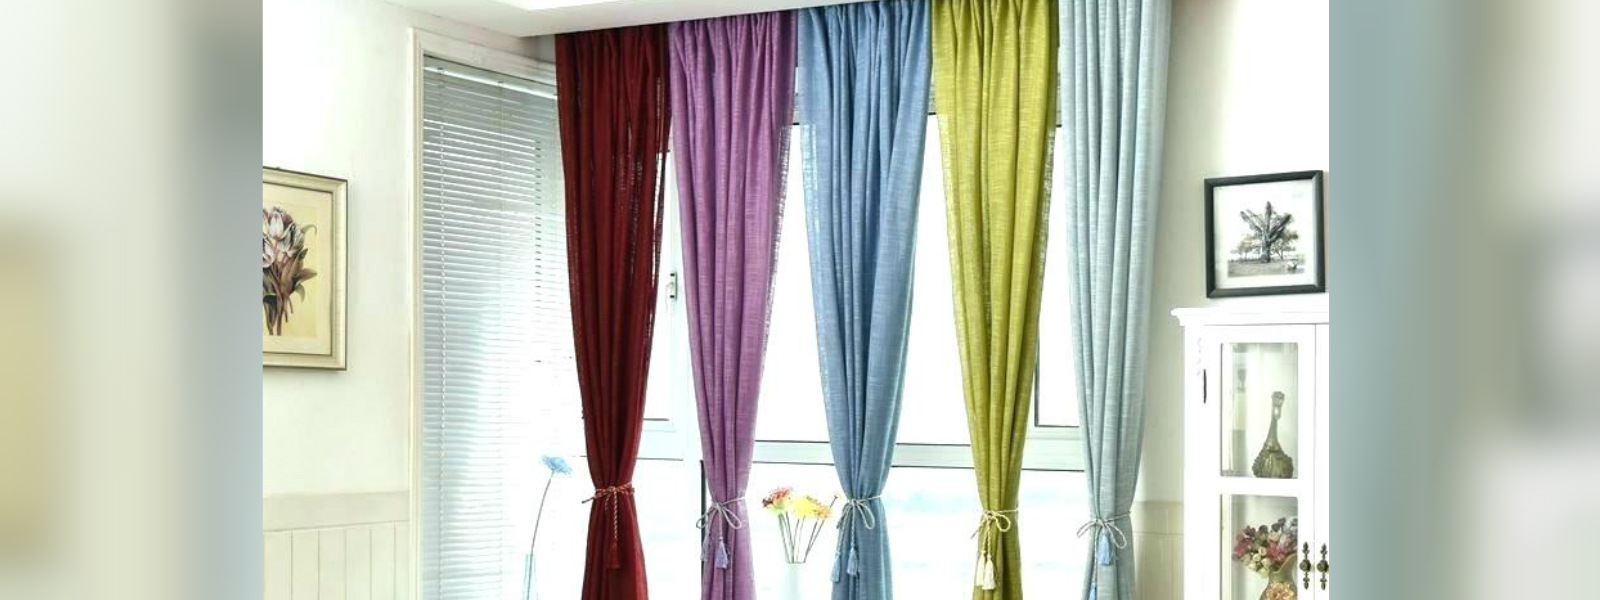 5 Reasons To Go Bold With Colorful Drapes